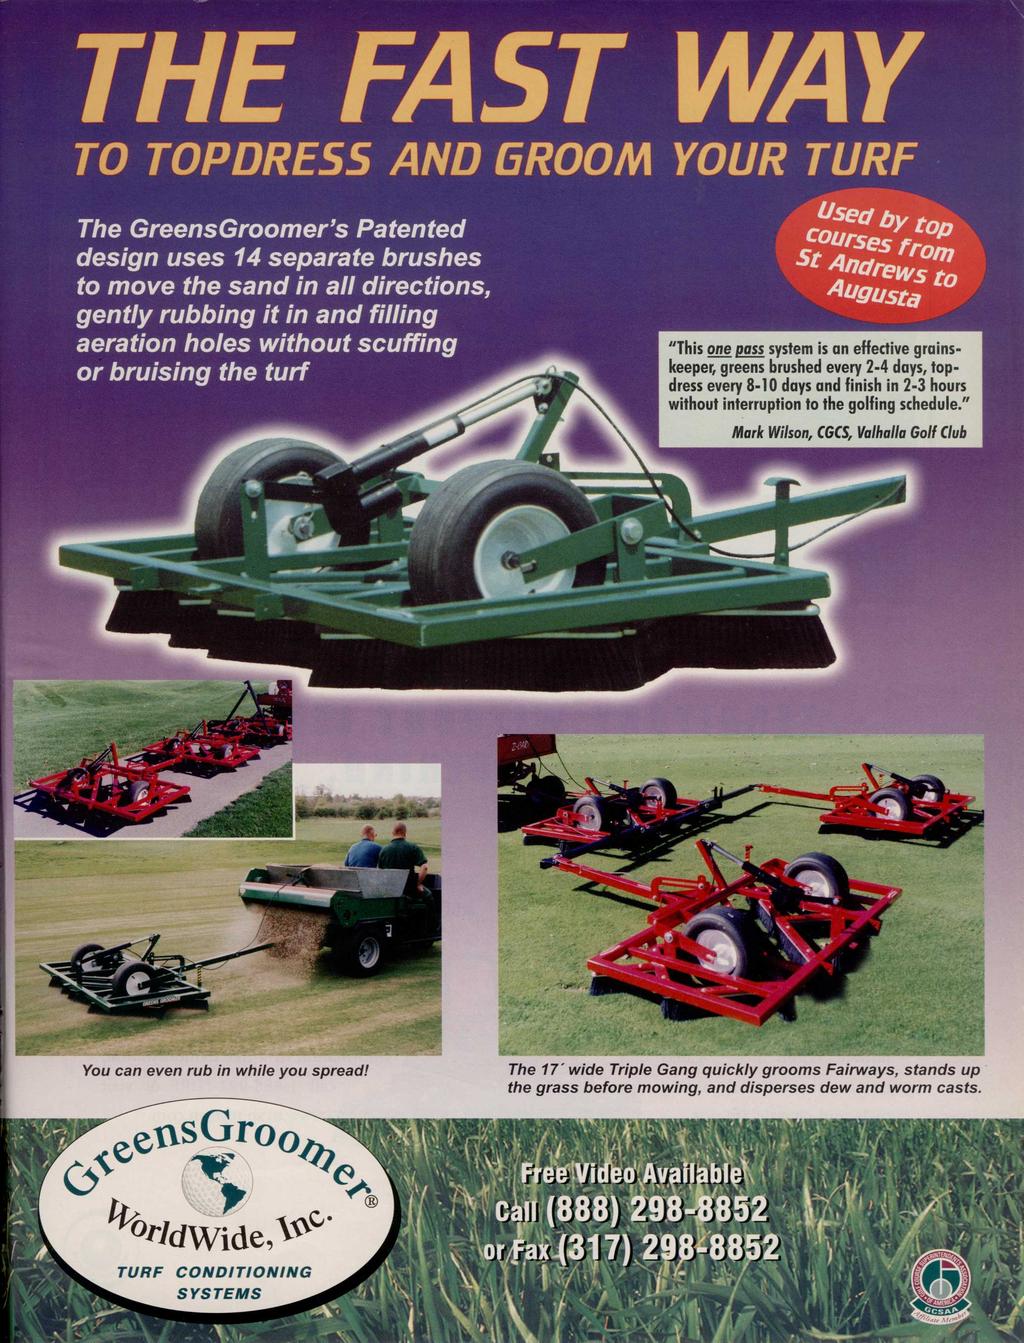 TO TOPDRESS AND GROOM YOUR TURF The GreensGroomer's Patented design uses 14 separate brushes to move the sand in ali directions gently rubbing it in and filling aeration holes without scuffing or